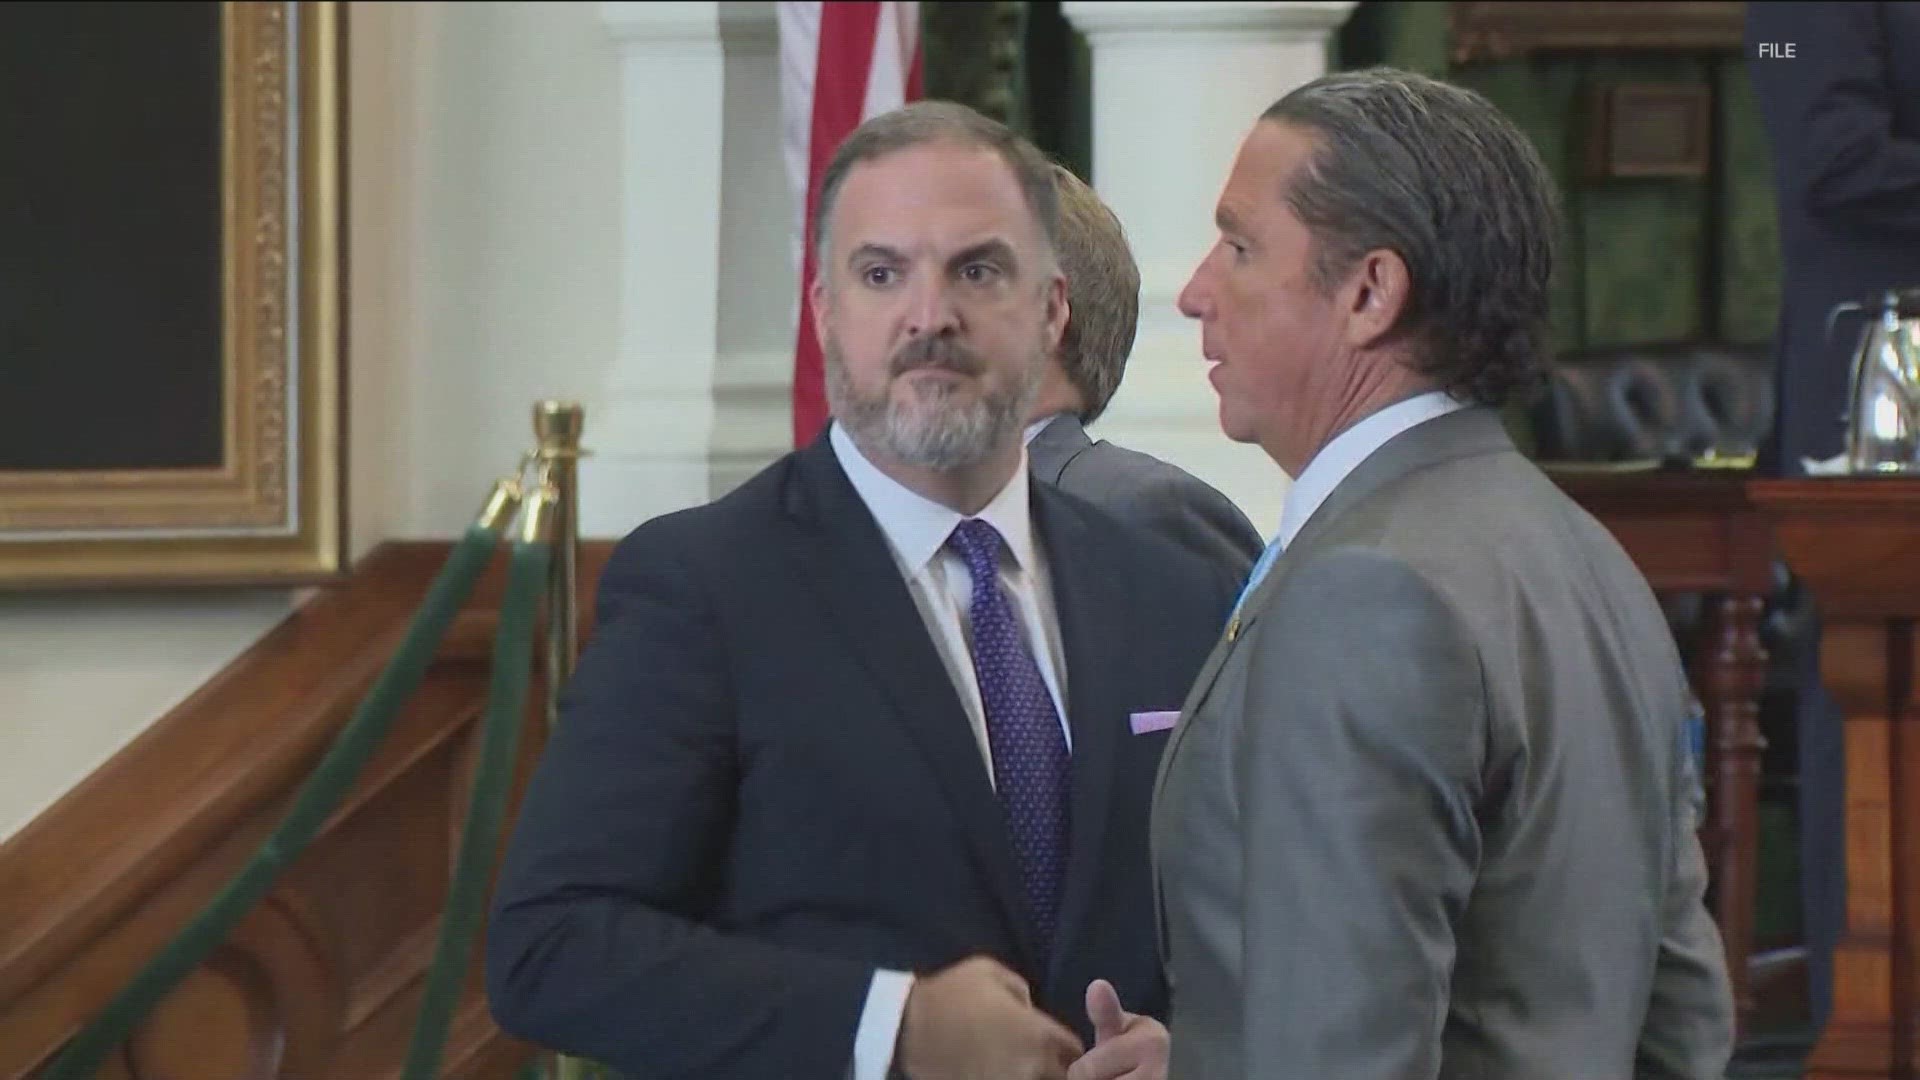 Texas Attorney General Ken Paxton may be forced to answer questions under oath in a lawsuit that led to his impeachment.